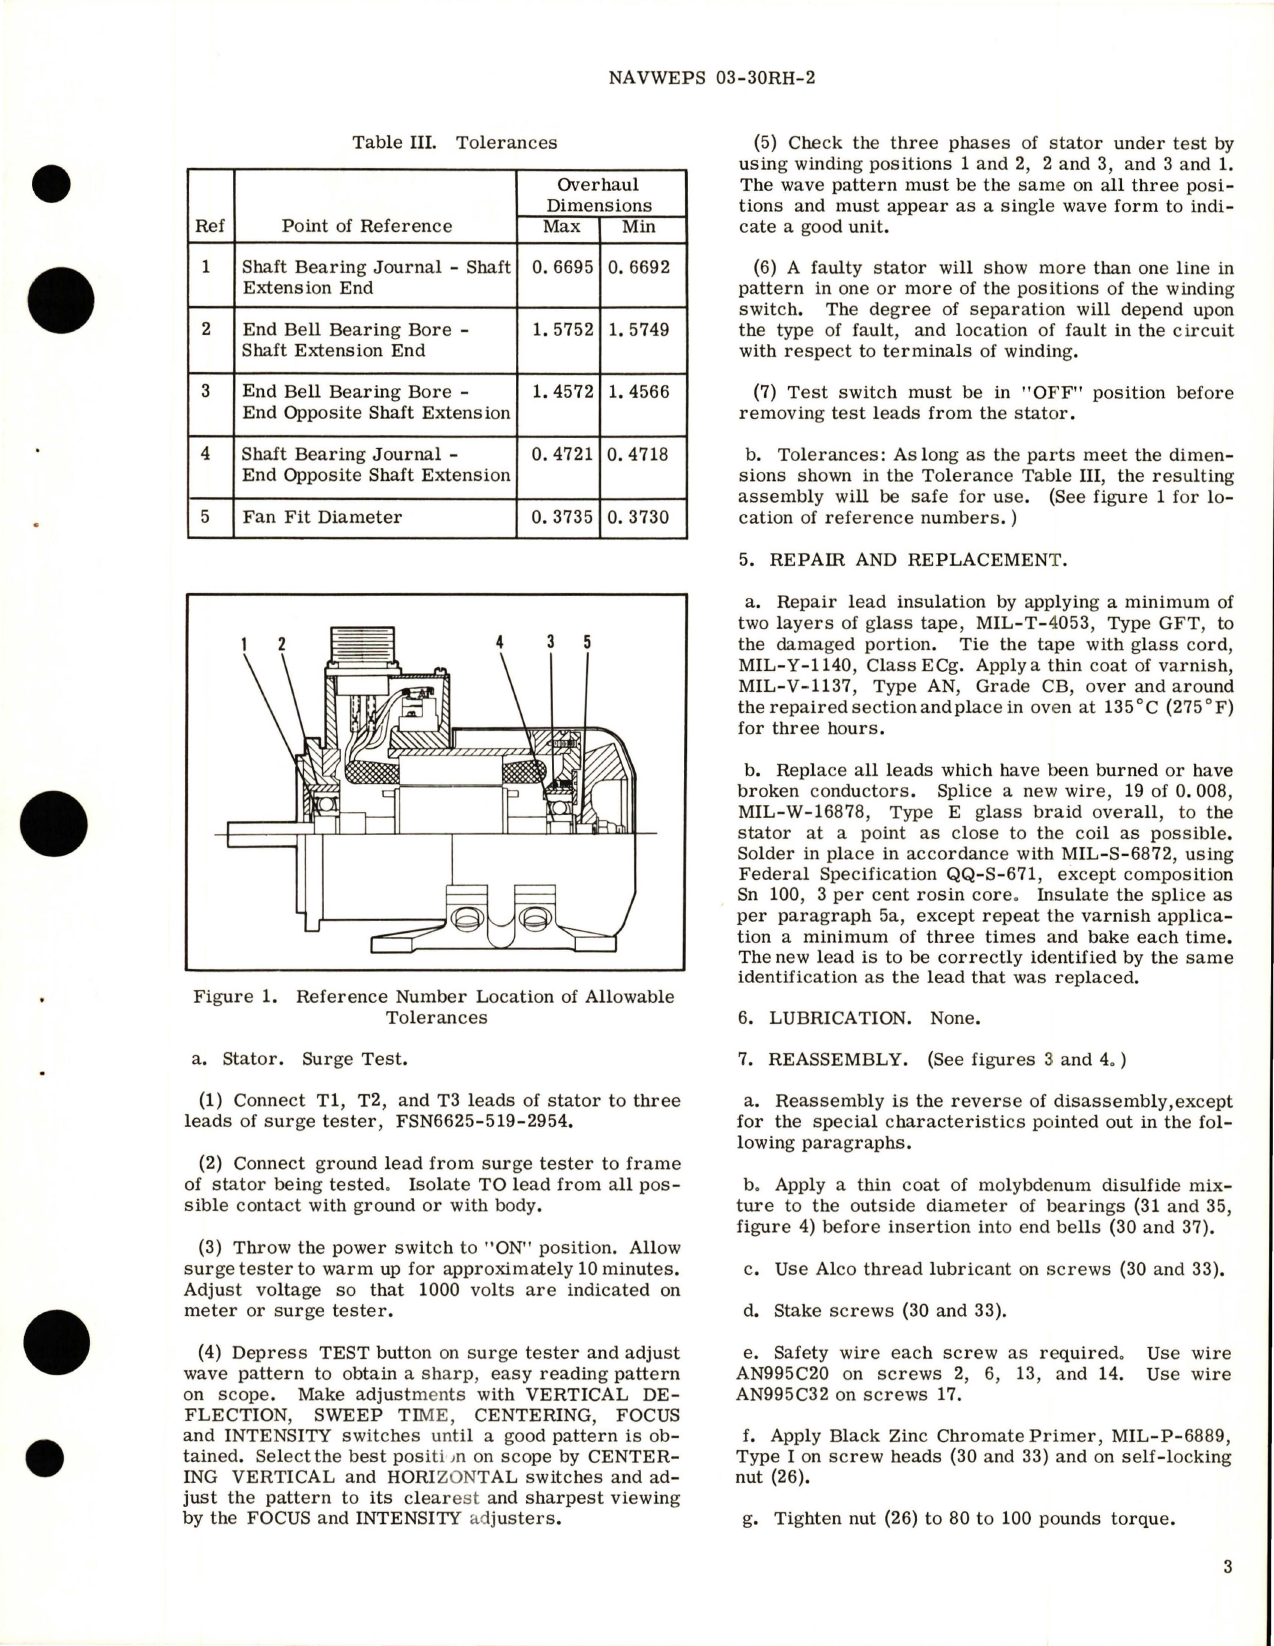 Sample page 5 from AirCorps Library document: Overhaul Instructions with Illustrated Parts Breakdown for Suction Boost Hydraulic Pump - Part 411000-1